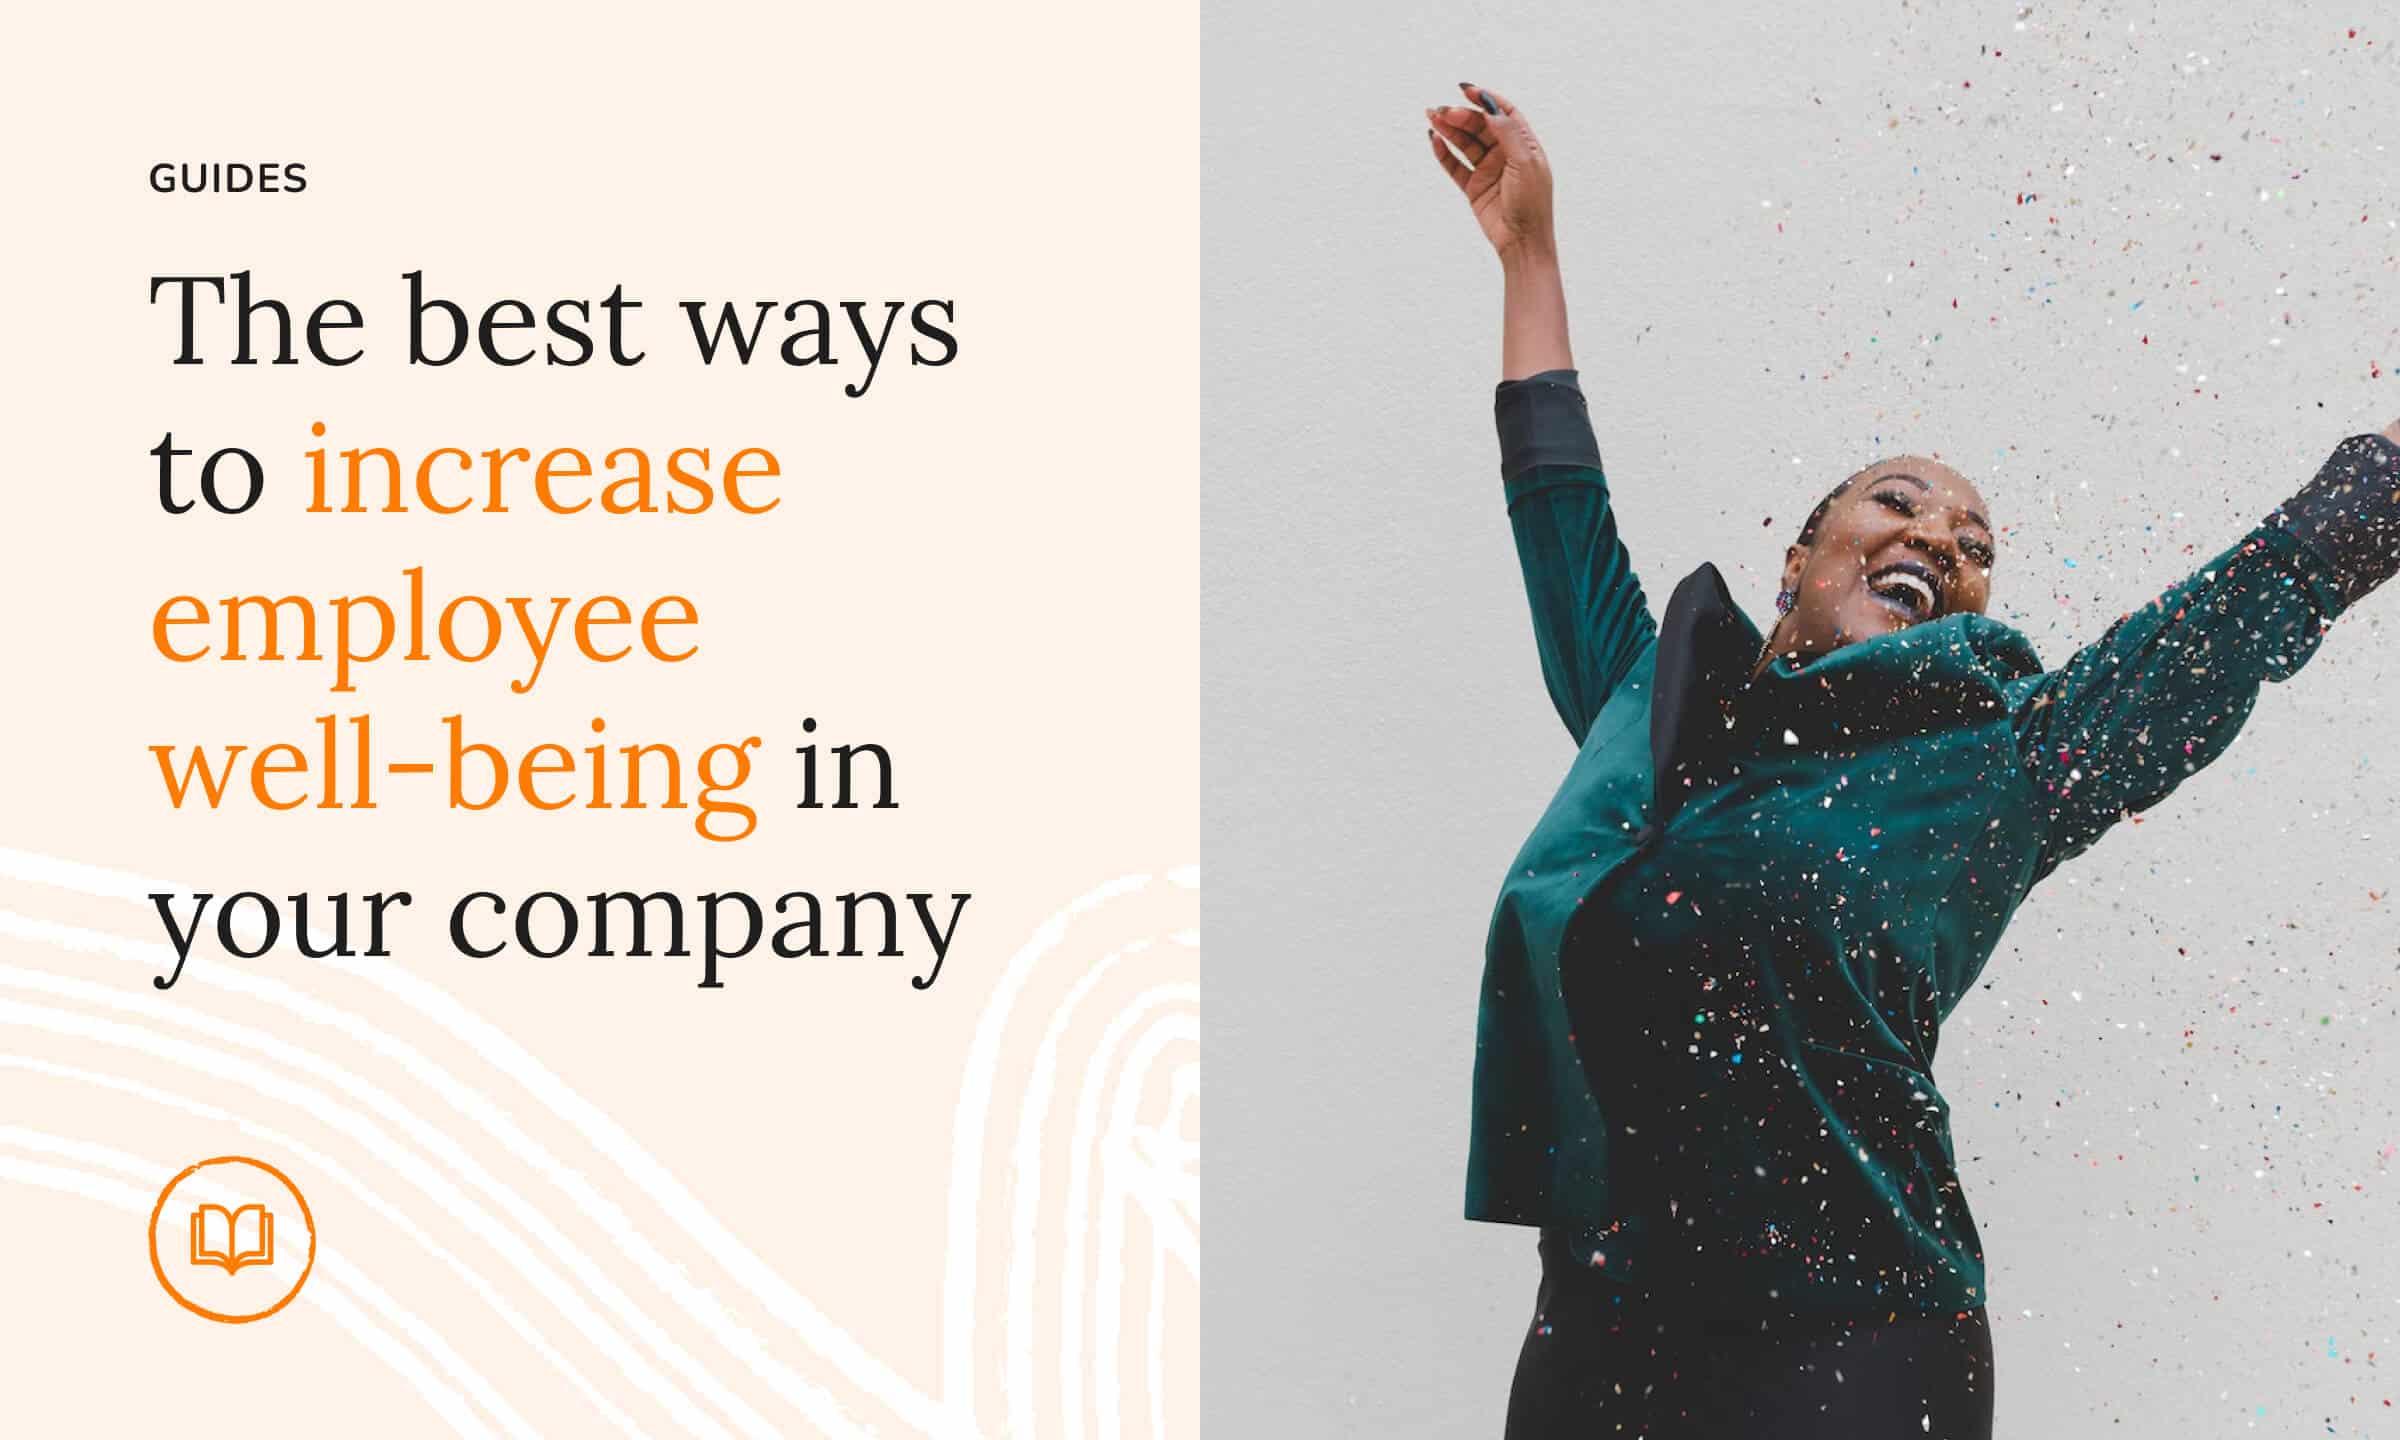 Employee well-being: how to increase it in your company